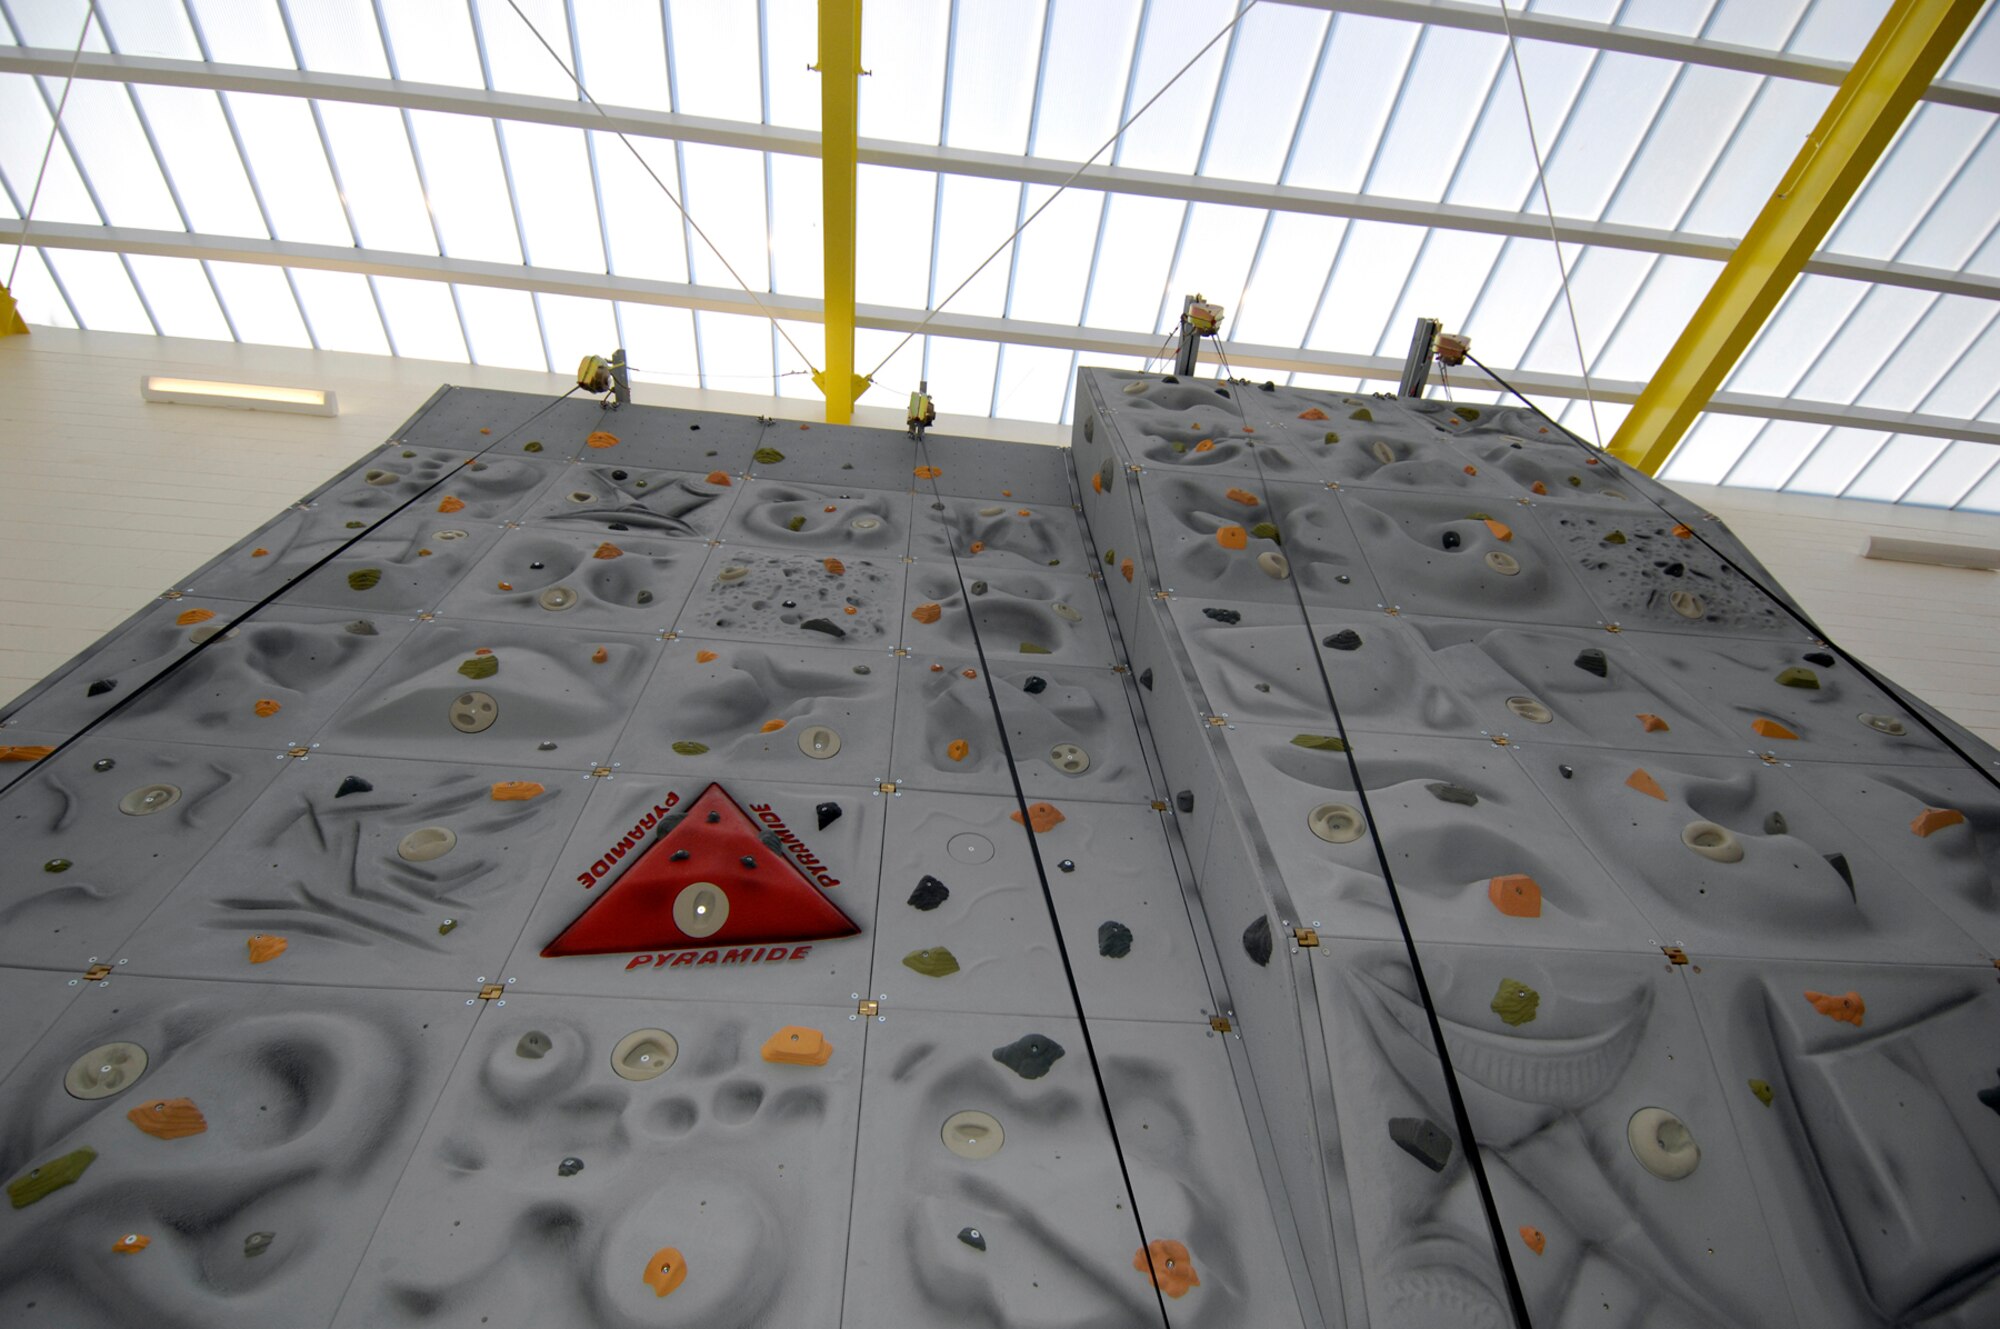 Hanscom Air Force Base, Mass. -- The new Fitness and Sports Center will feature a rock climbing wall, which will be located near the main entrance of the facility. There will be a ribbon cutting ceremony at 10:30 a.m. followed by tours of the facility from 11 a.m. to noon. The new fitness center will be open for use at noon. (U.S. Air Force photo by Mark Wyatt)